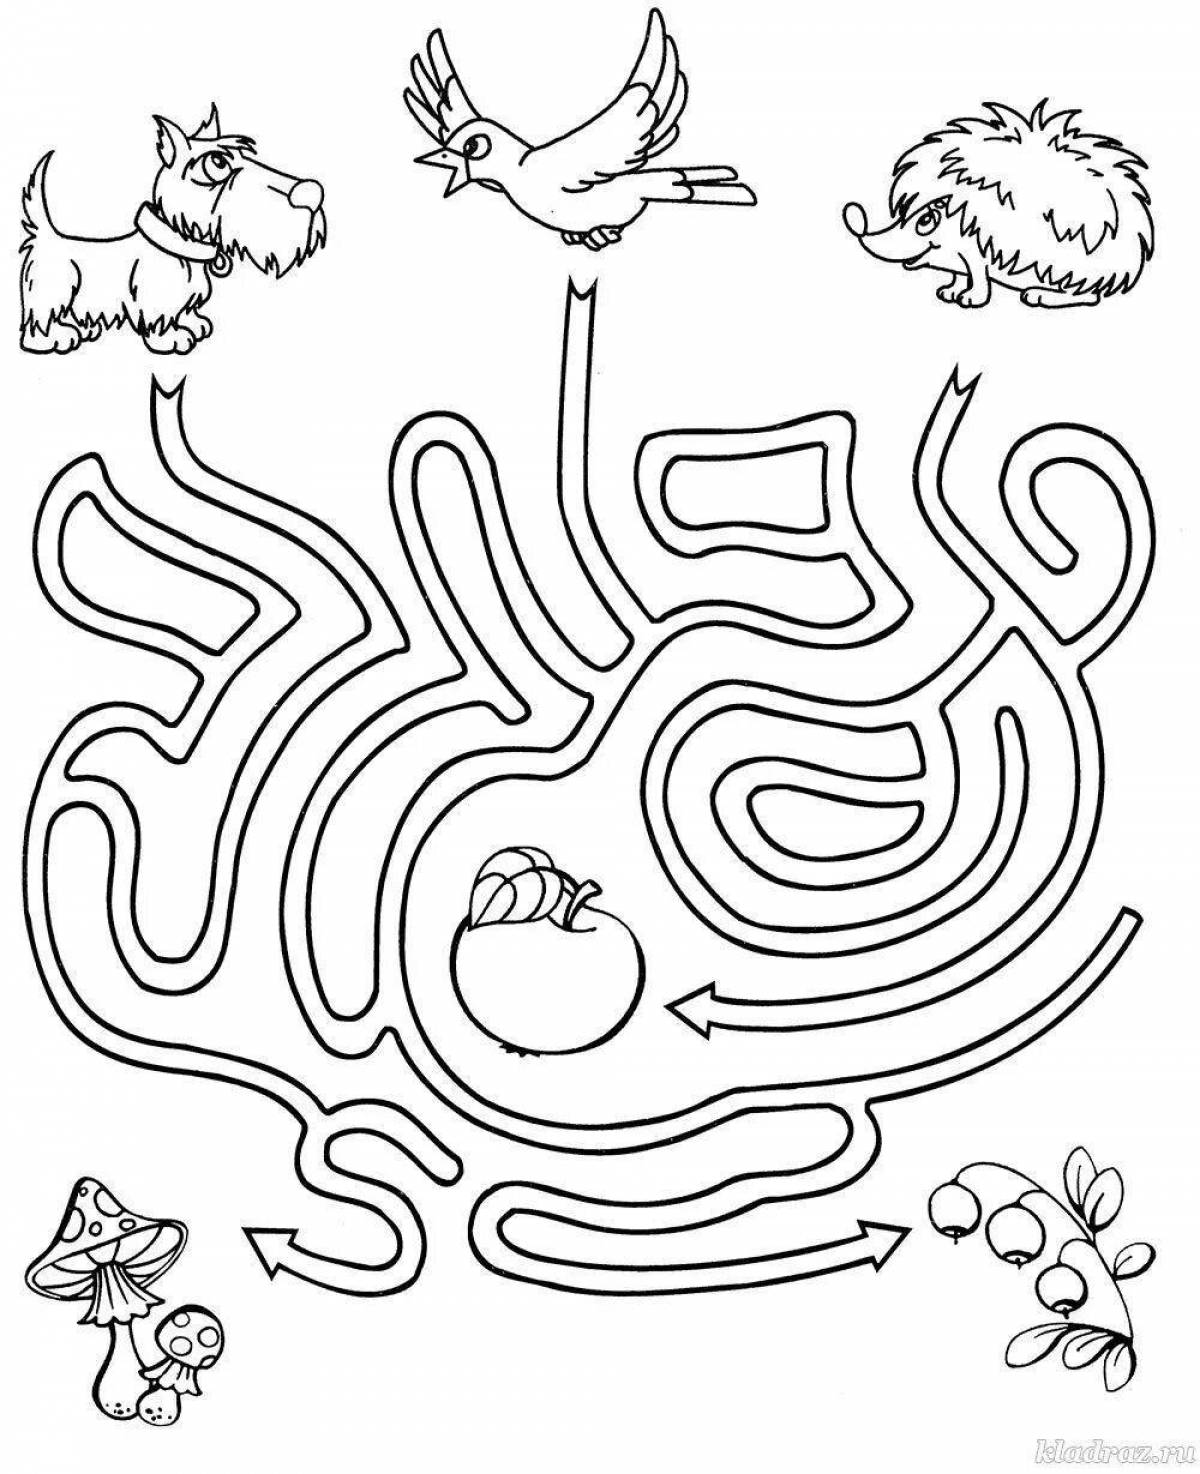 Stimulating kids coloring games for 4 year olds